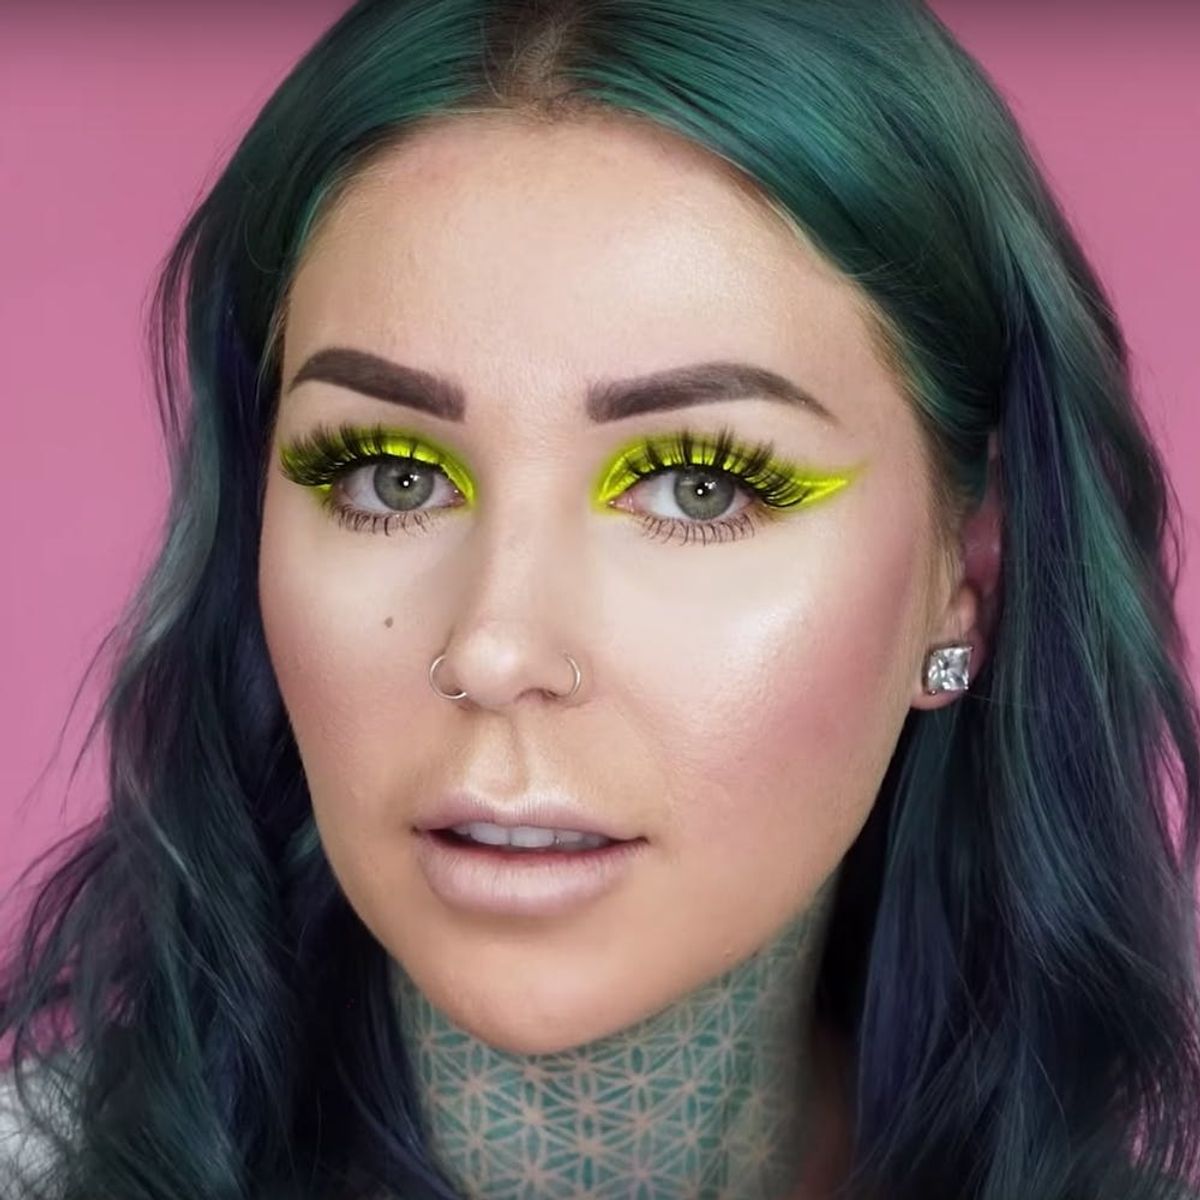 The Neon Makeup Trend Is the Look That’s Ready to Party